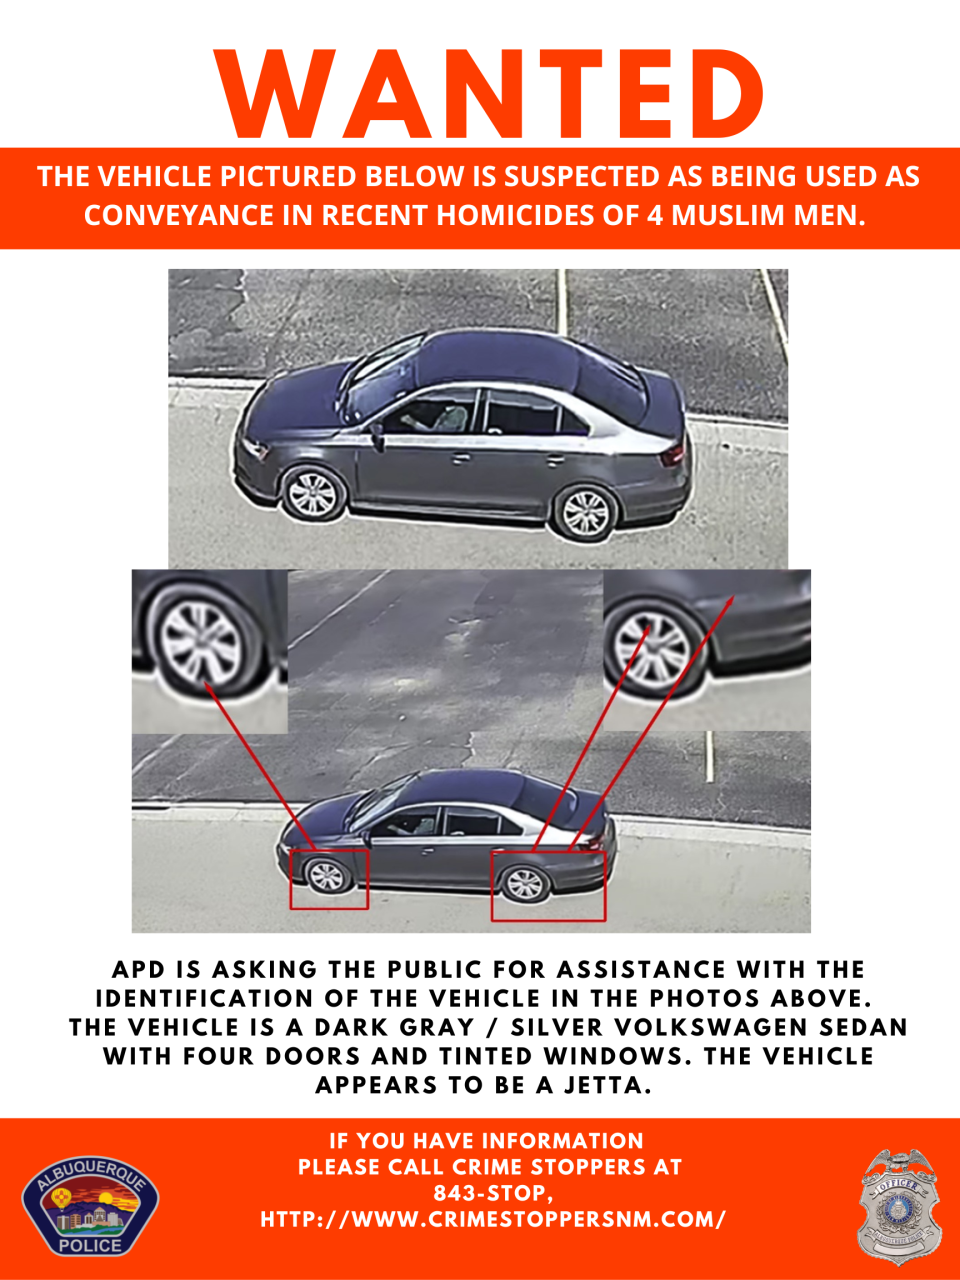 Albuquerque Police Department are asking for help identifying a vehicle suspected of being used in the homicide of four Muslim men / Credit: Albuquerque Police Department